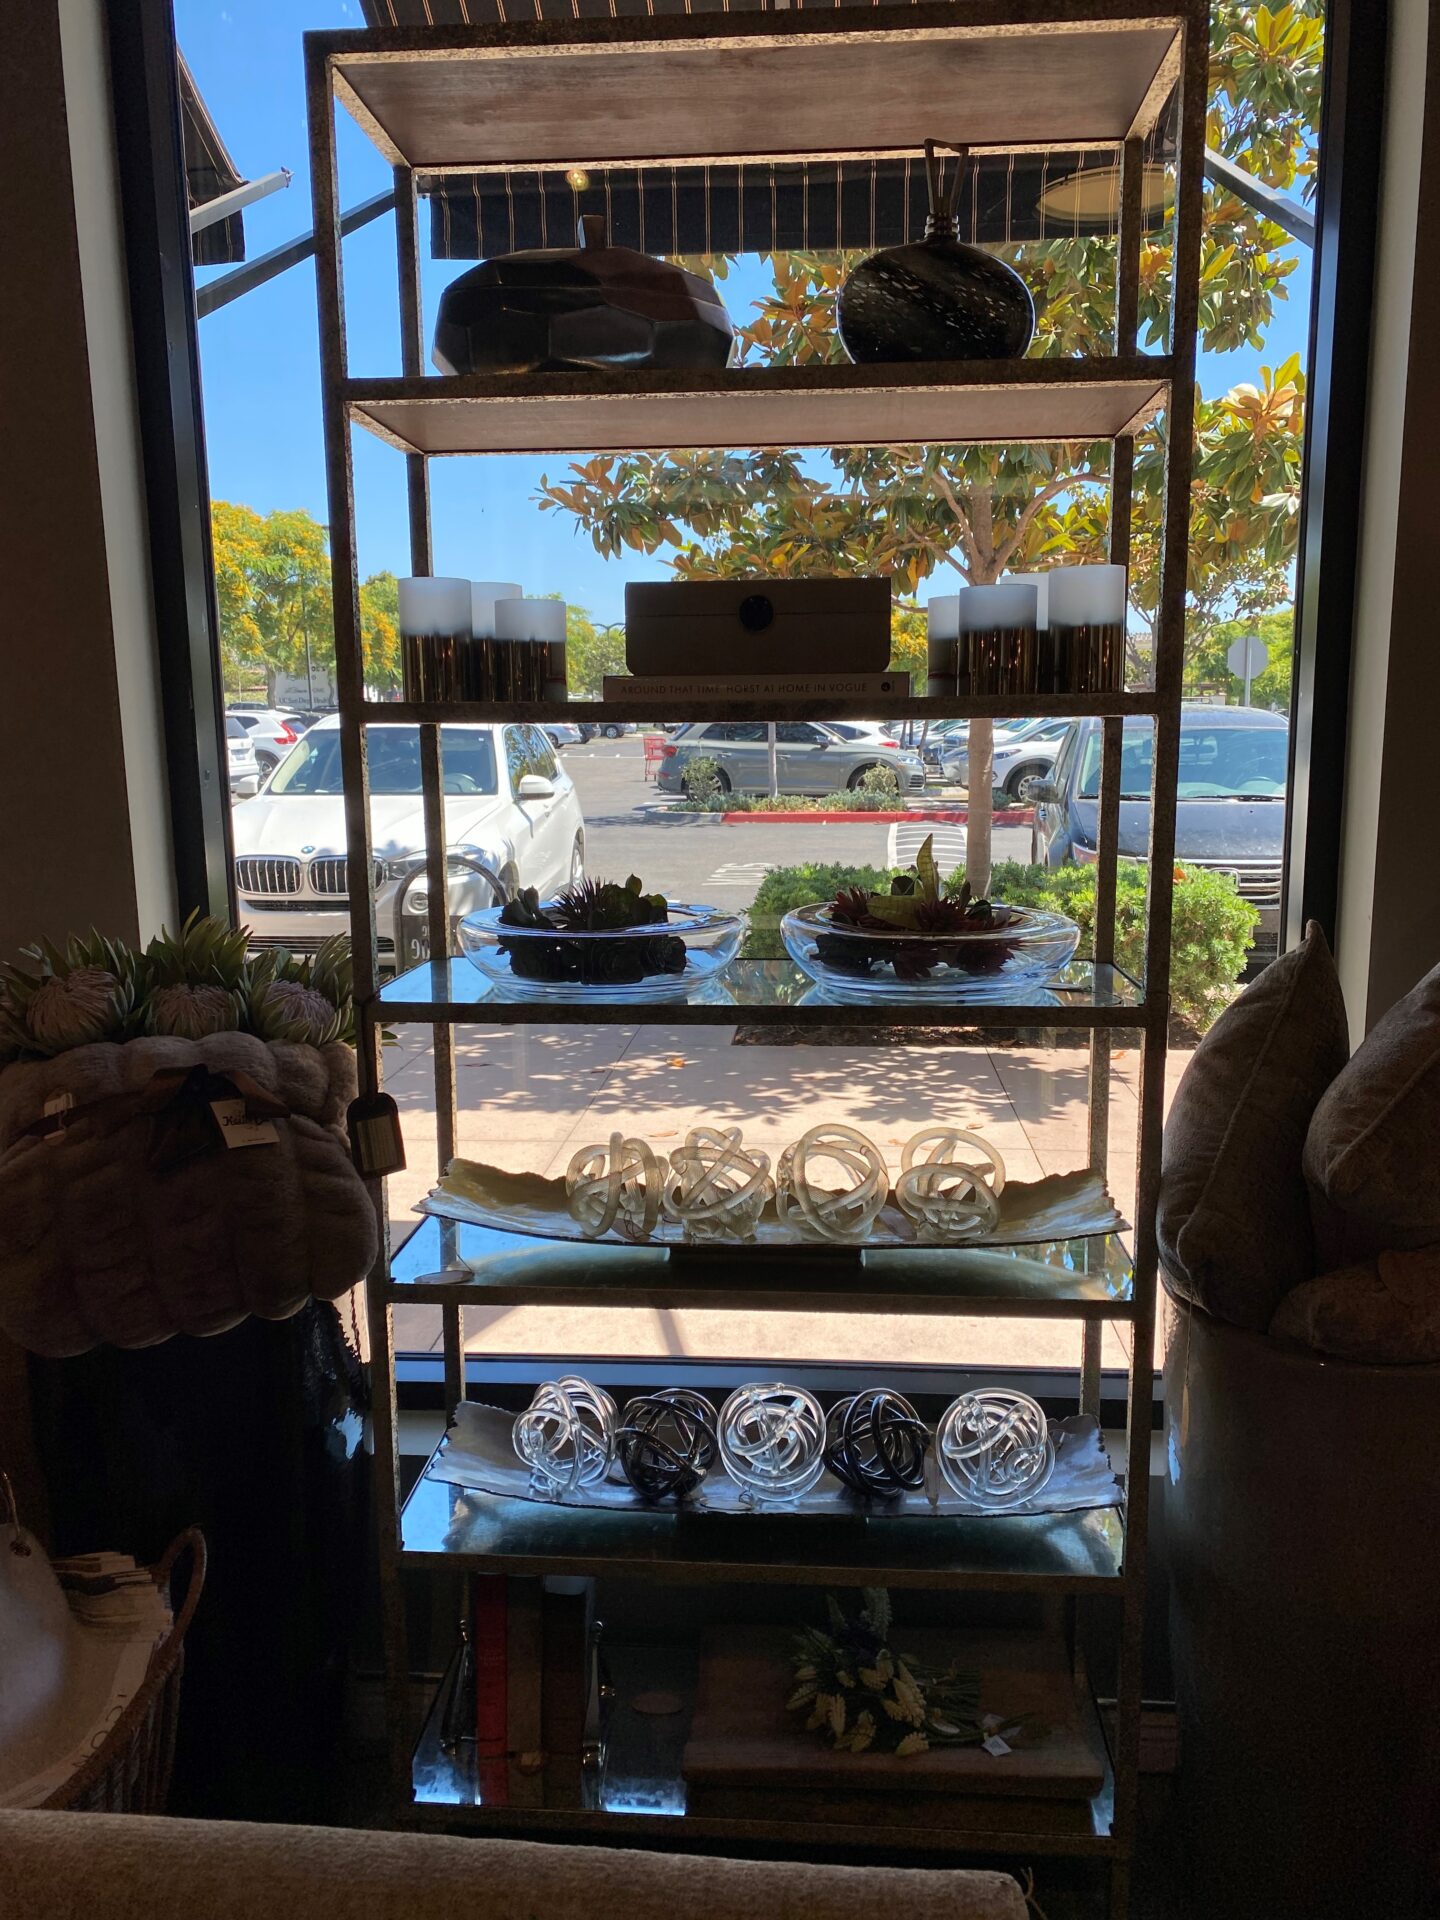 A window with shelves and bowls on it